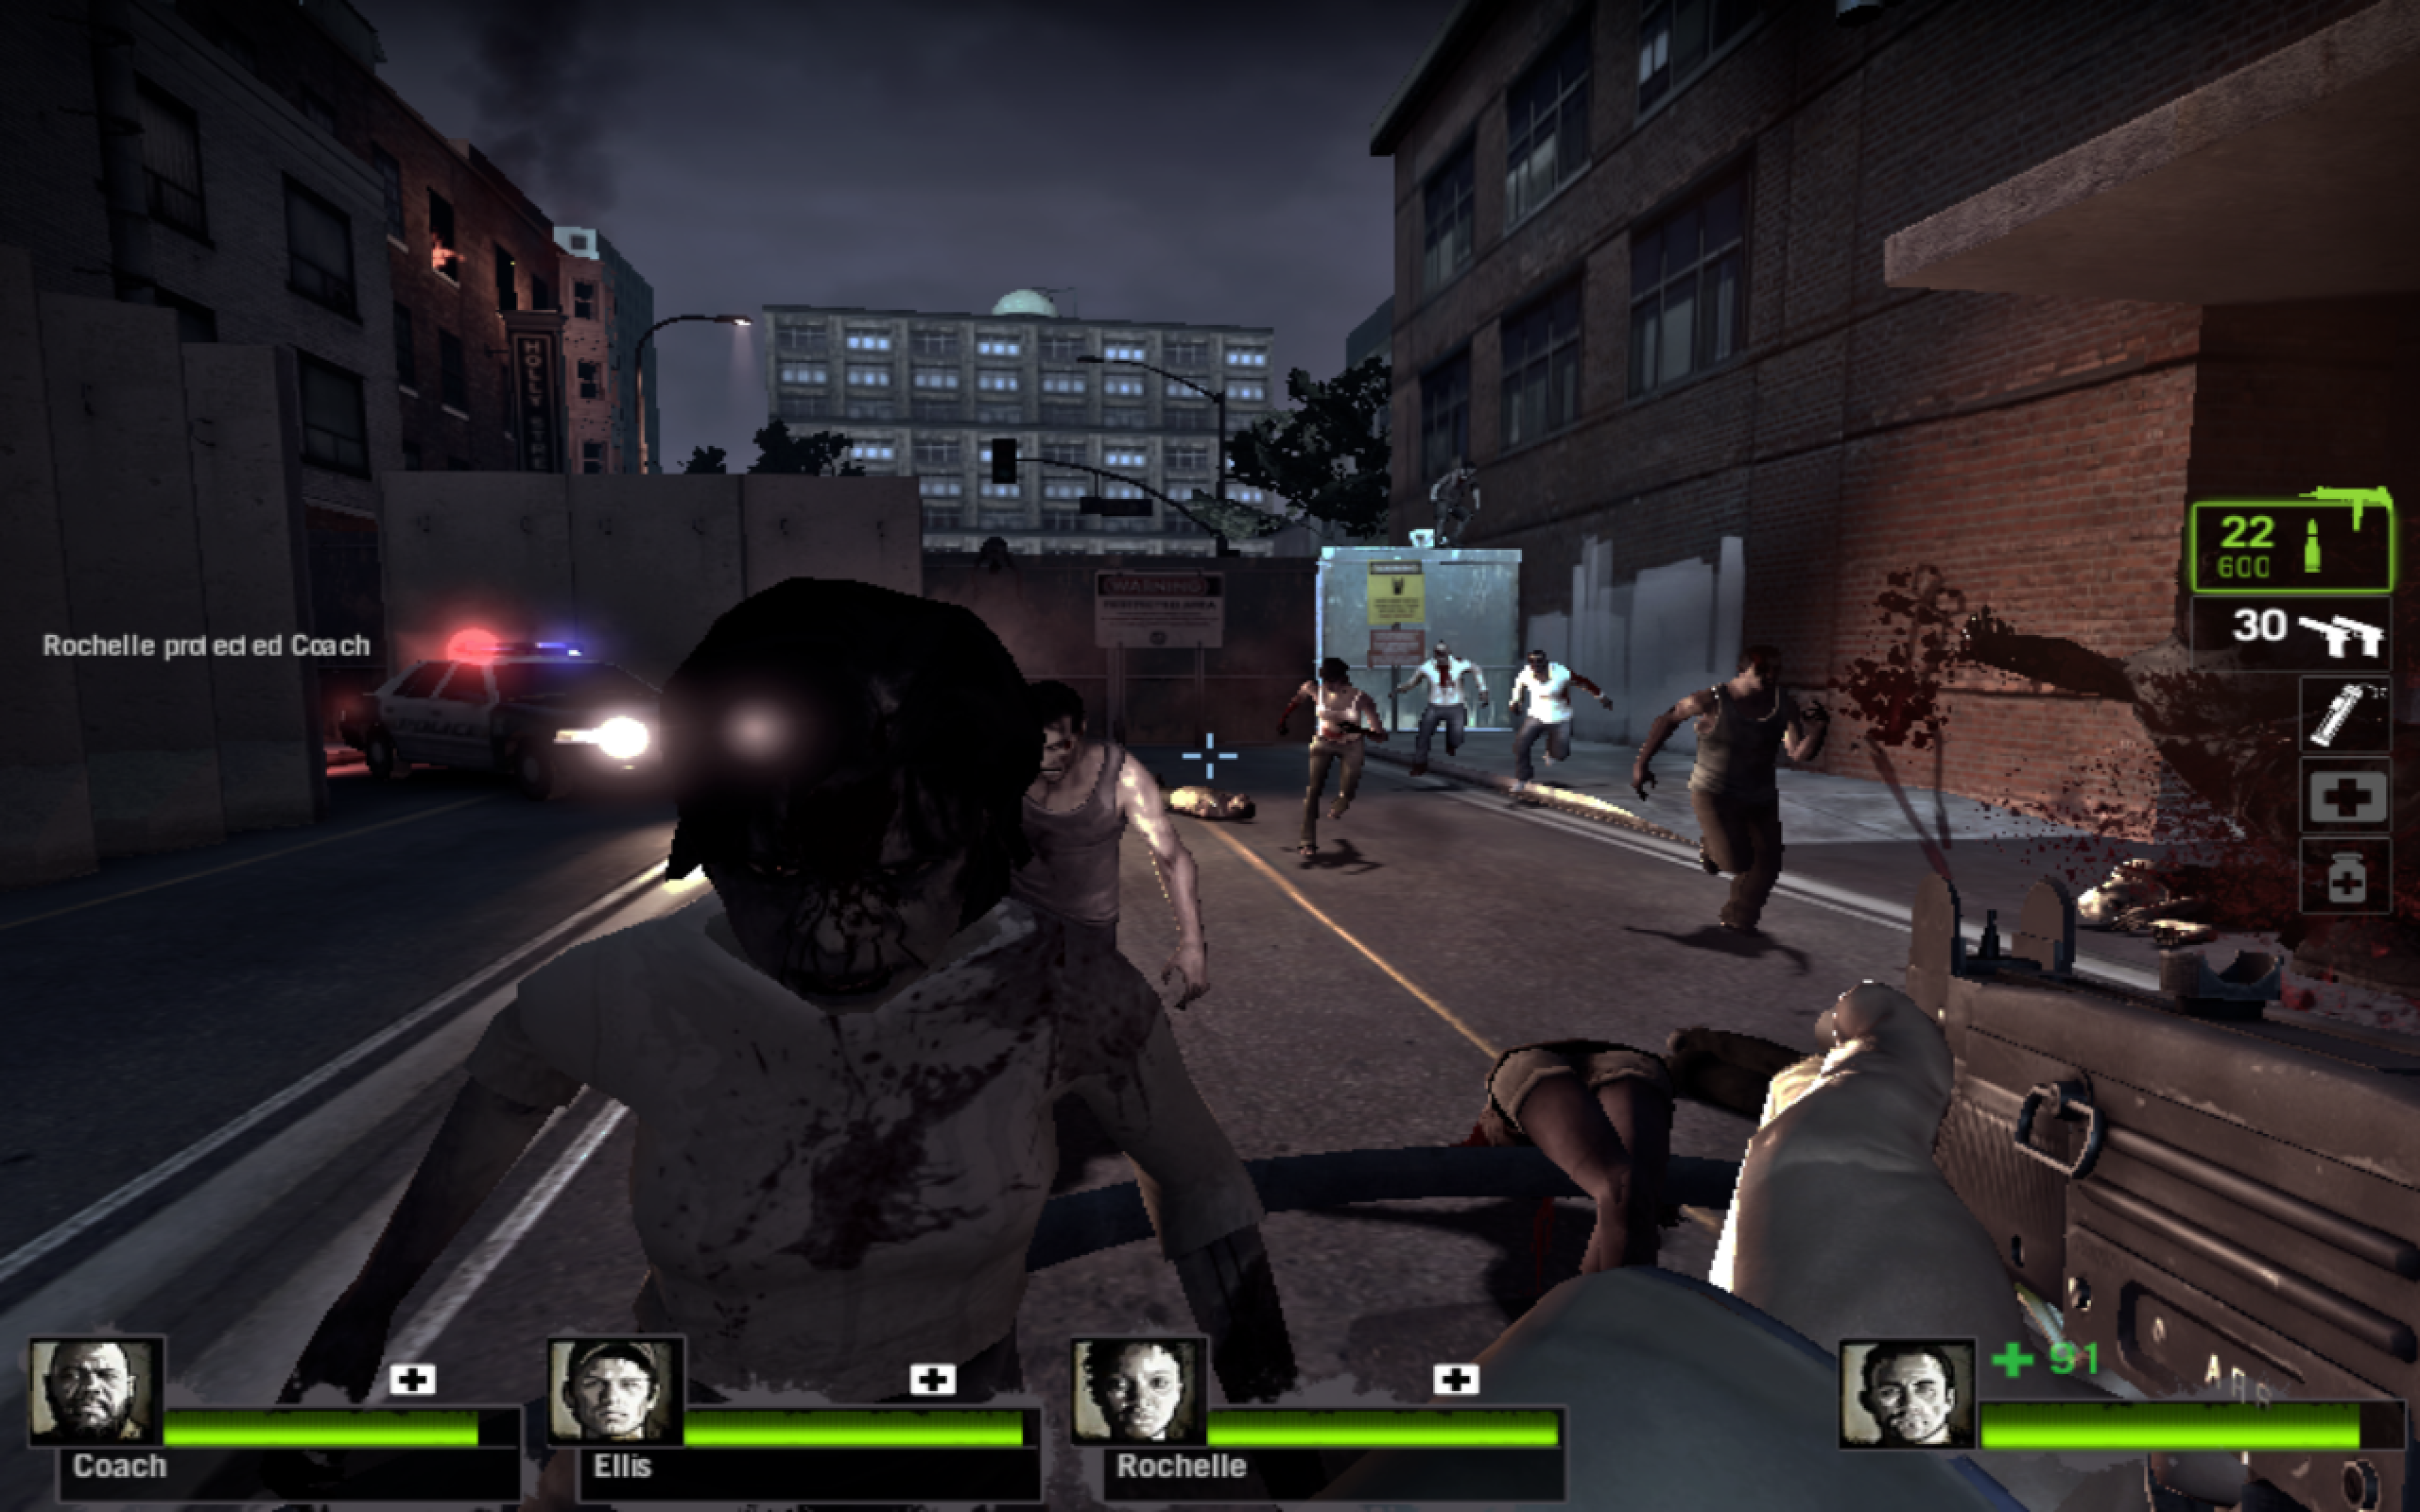 left 4 dead 2 steam charts